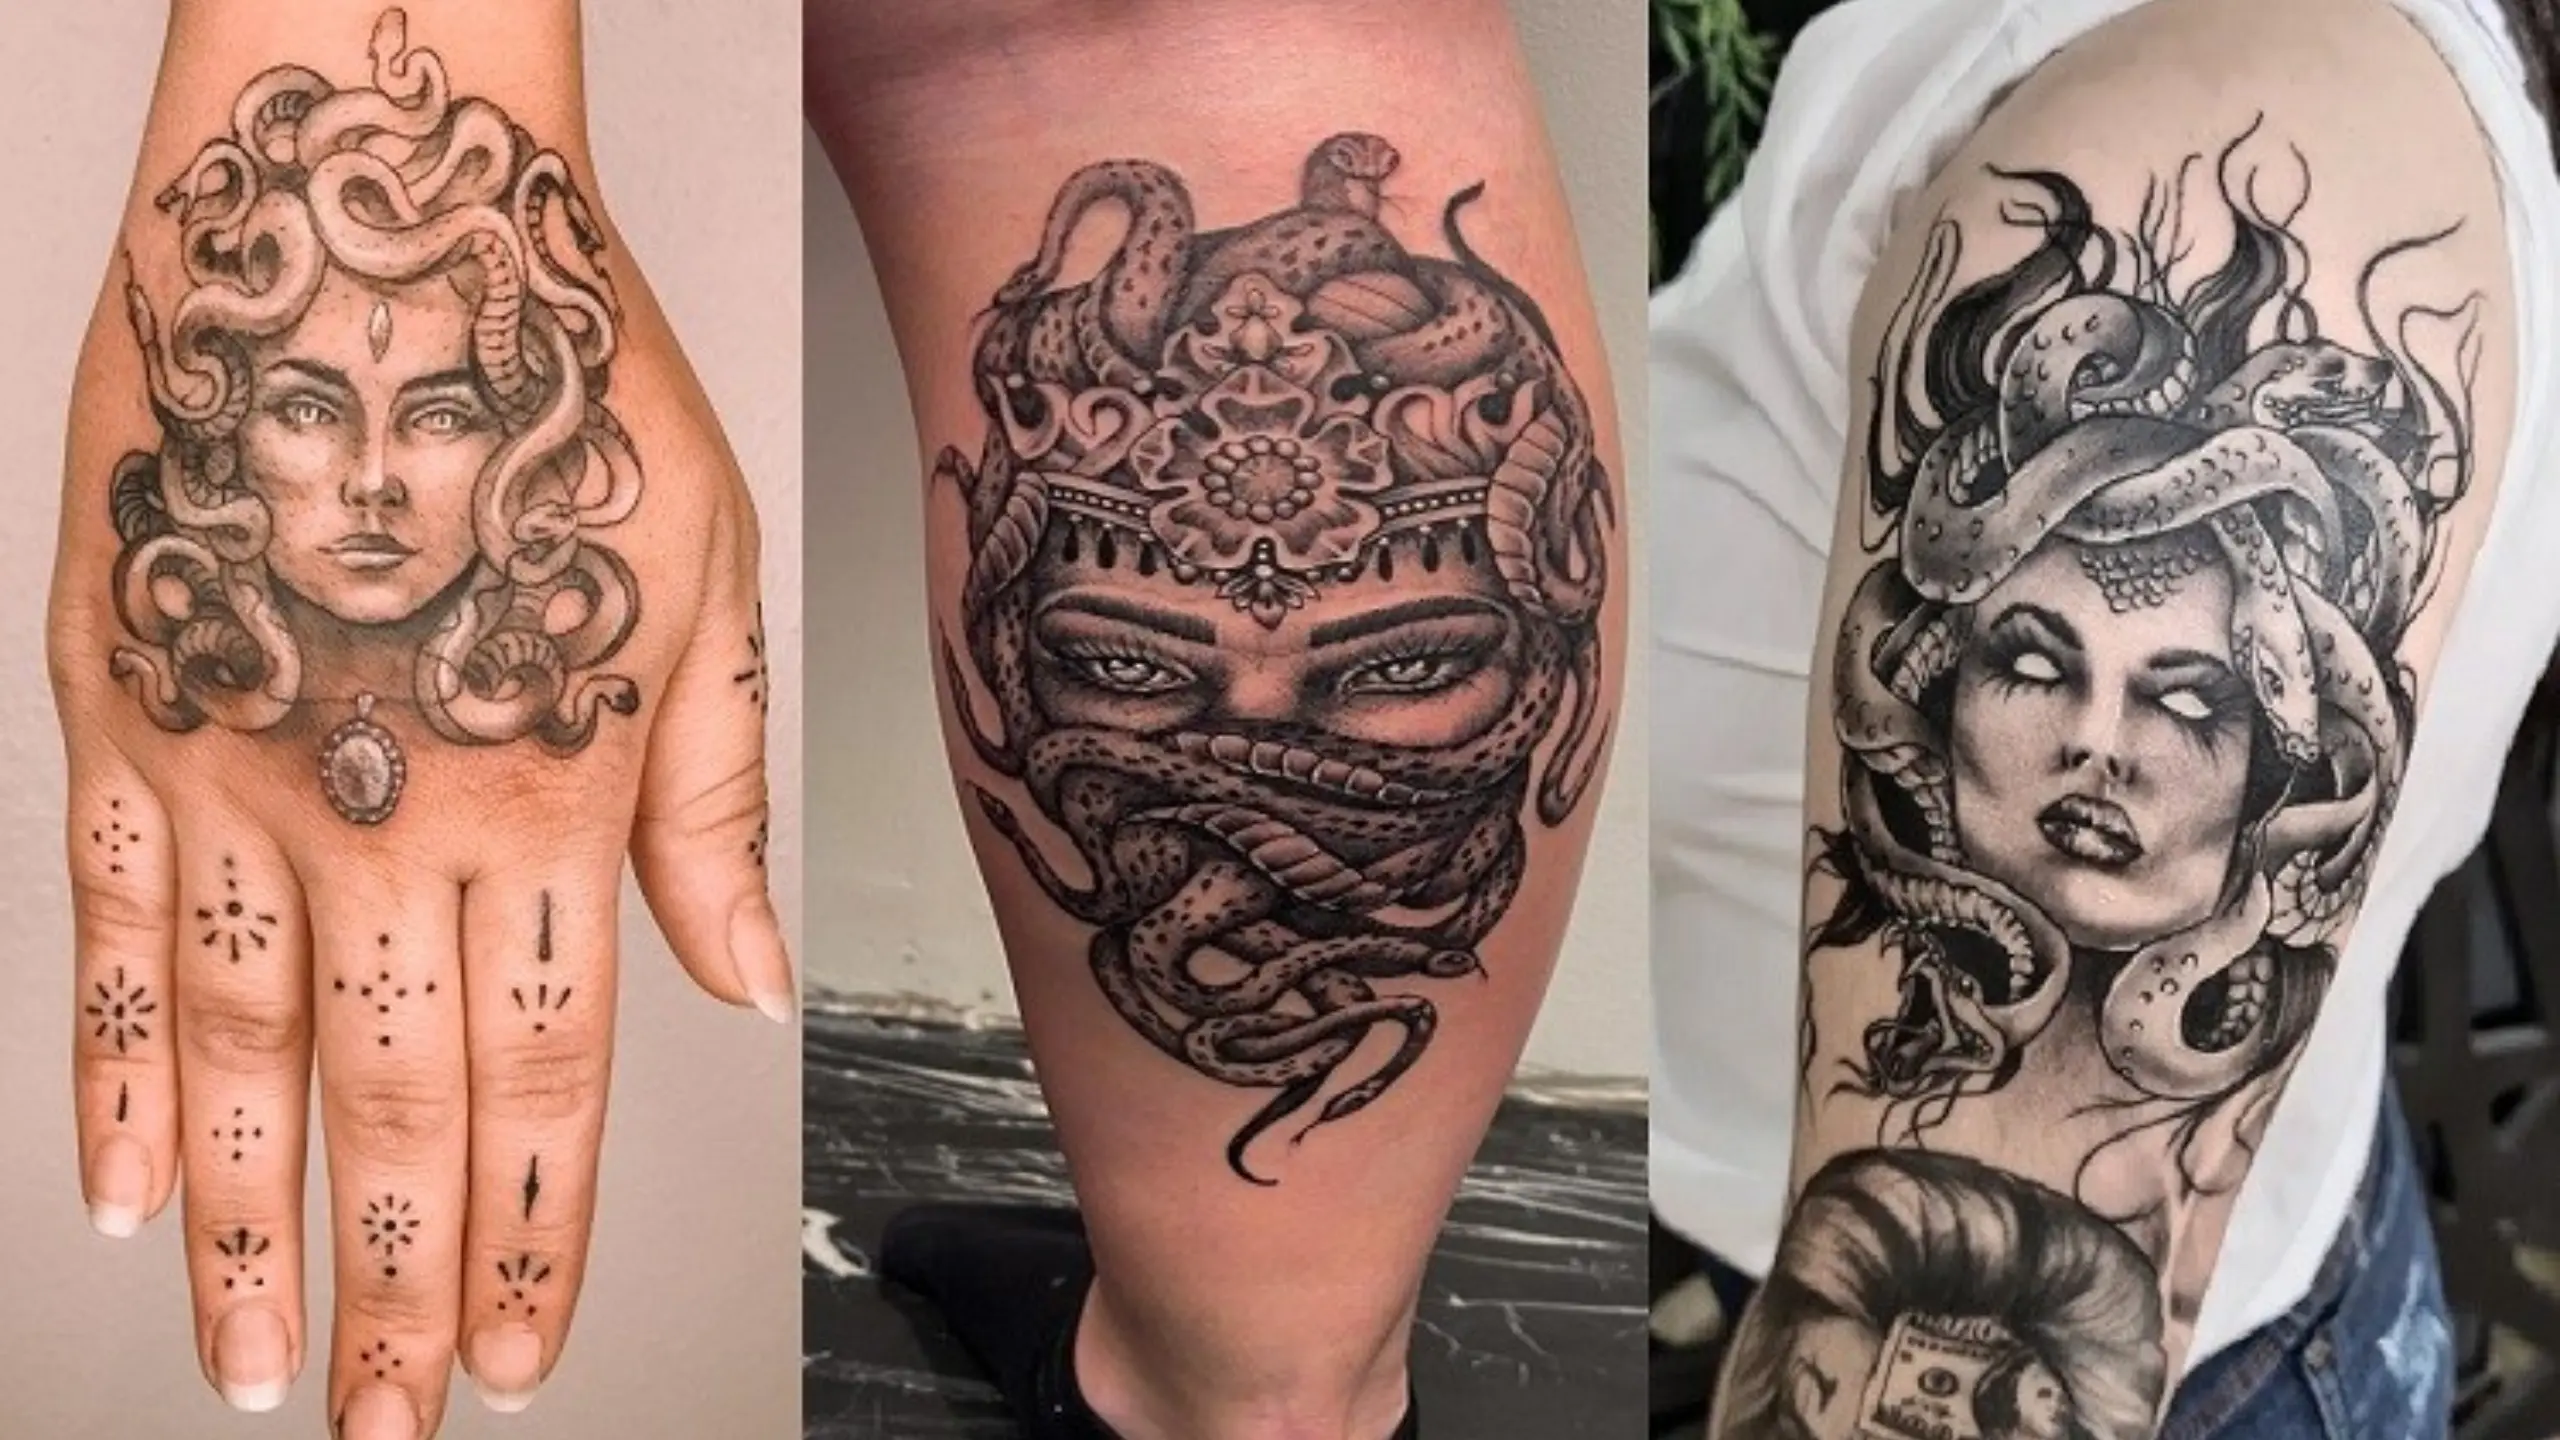 What Does a Medusa Tattoo Mean